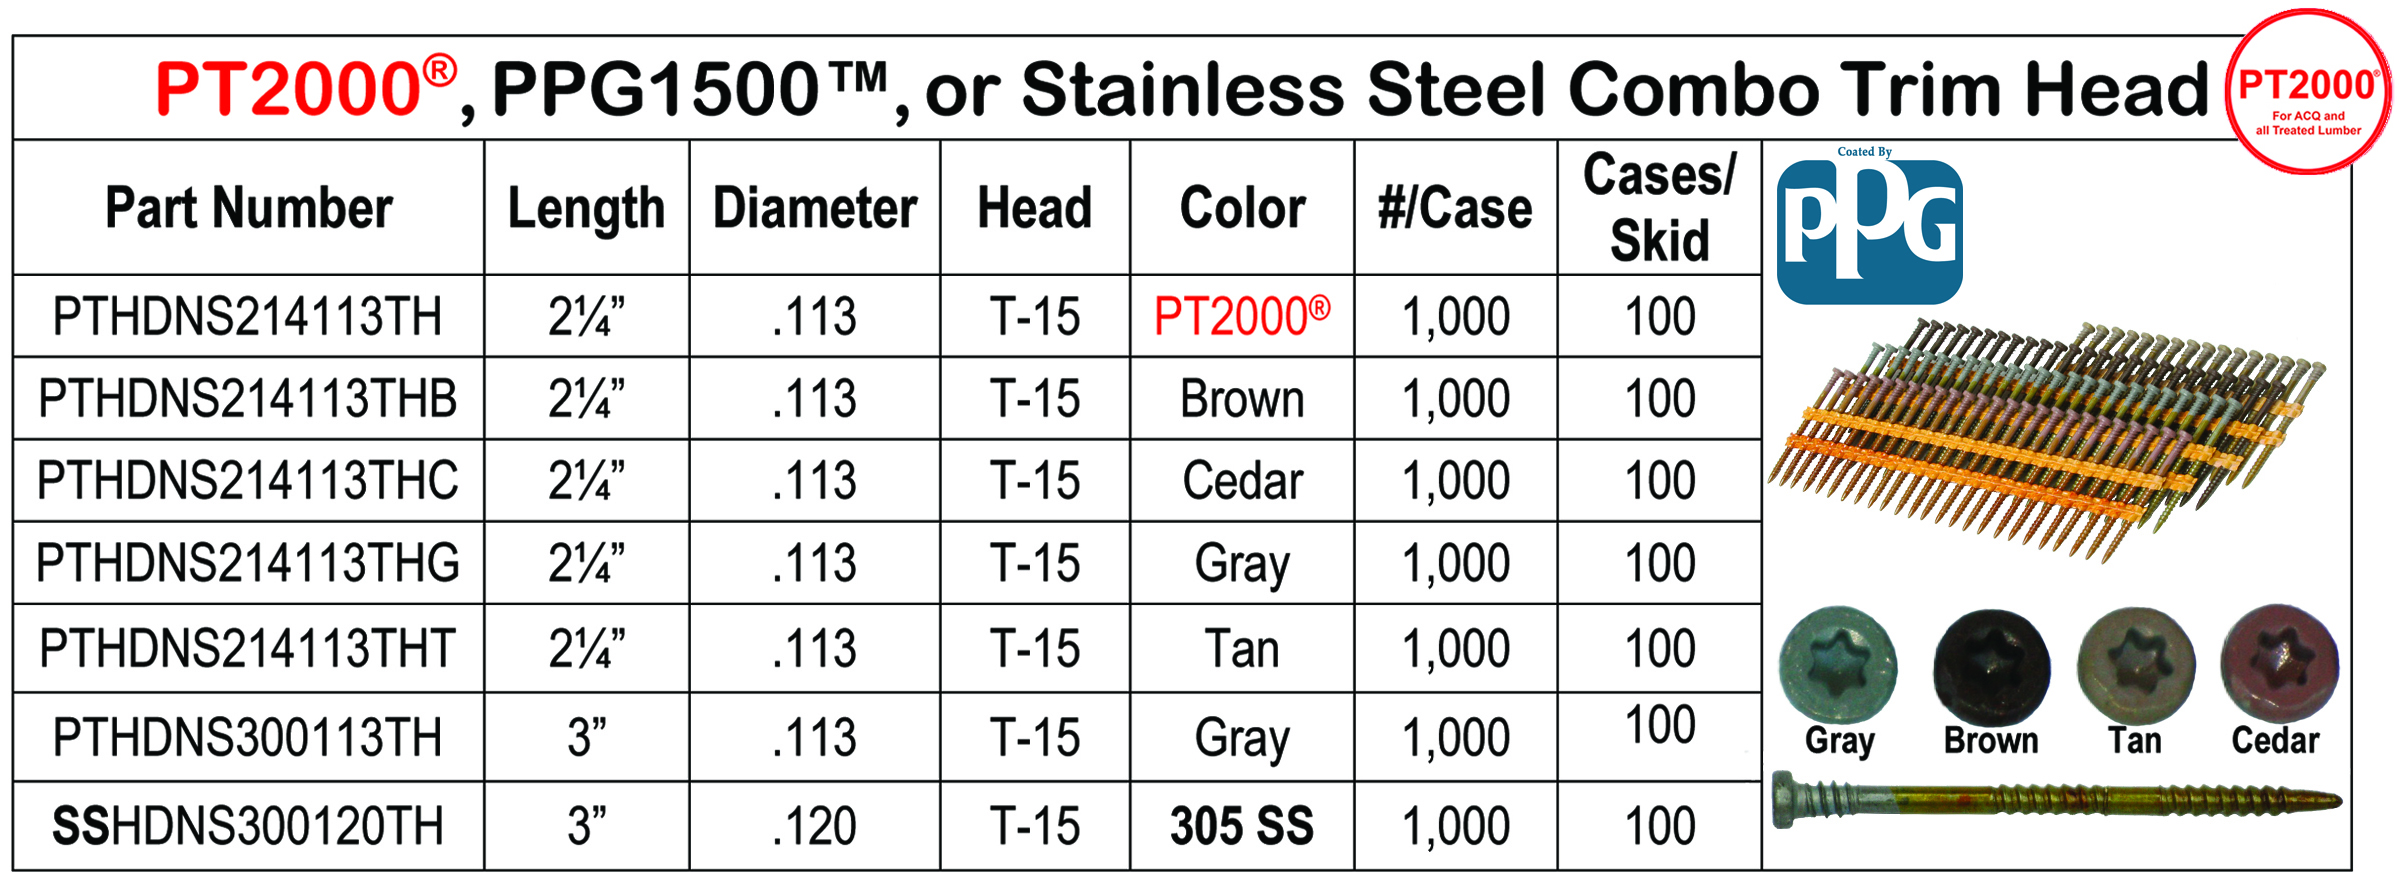 PT2000, PPG1500, & Stainless Steel Combo Trim Head